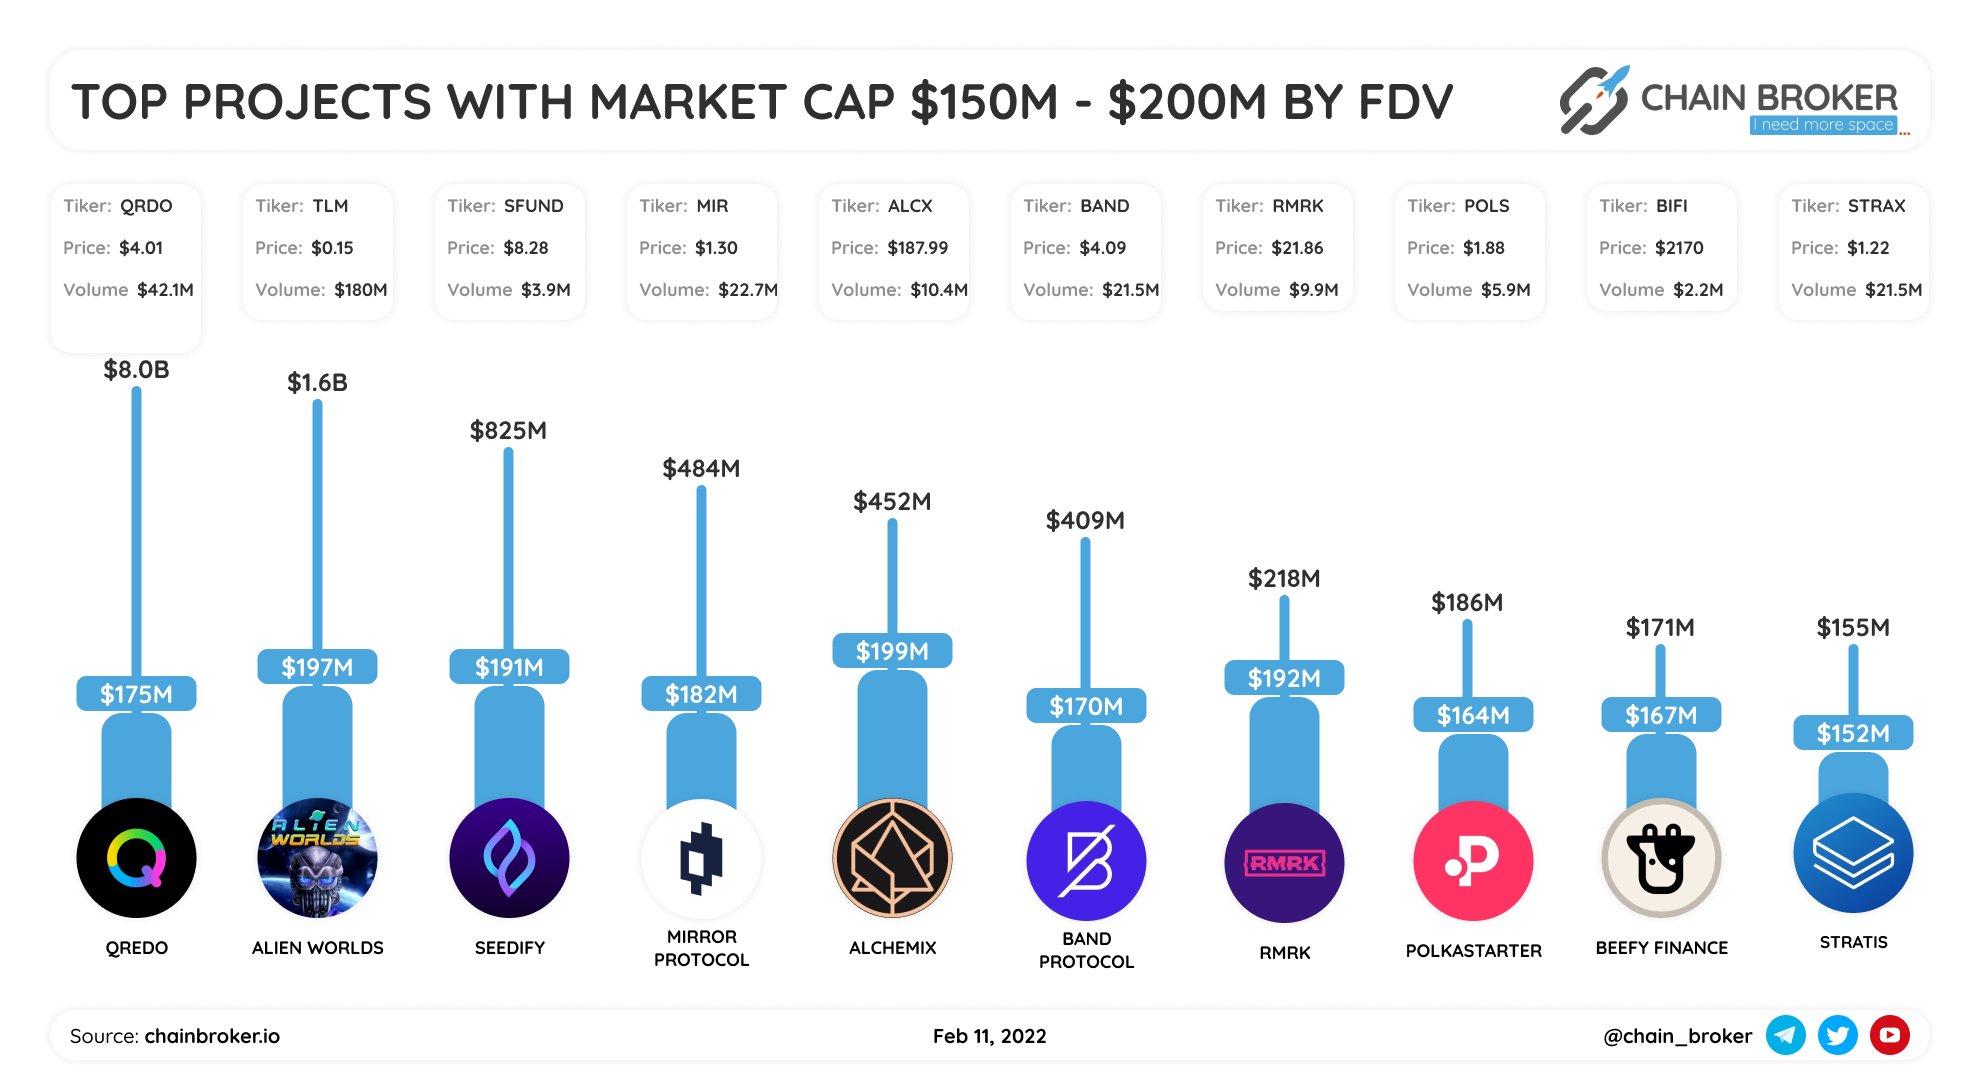 Top projects with market cap $150M-$200M ranged by FDV